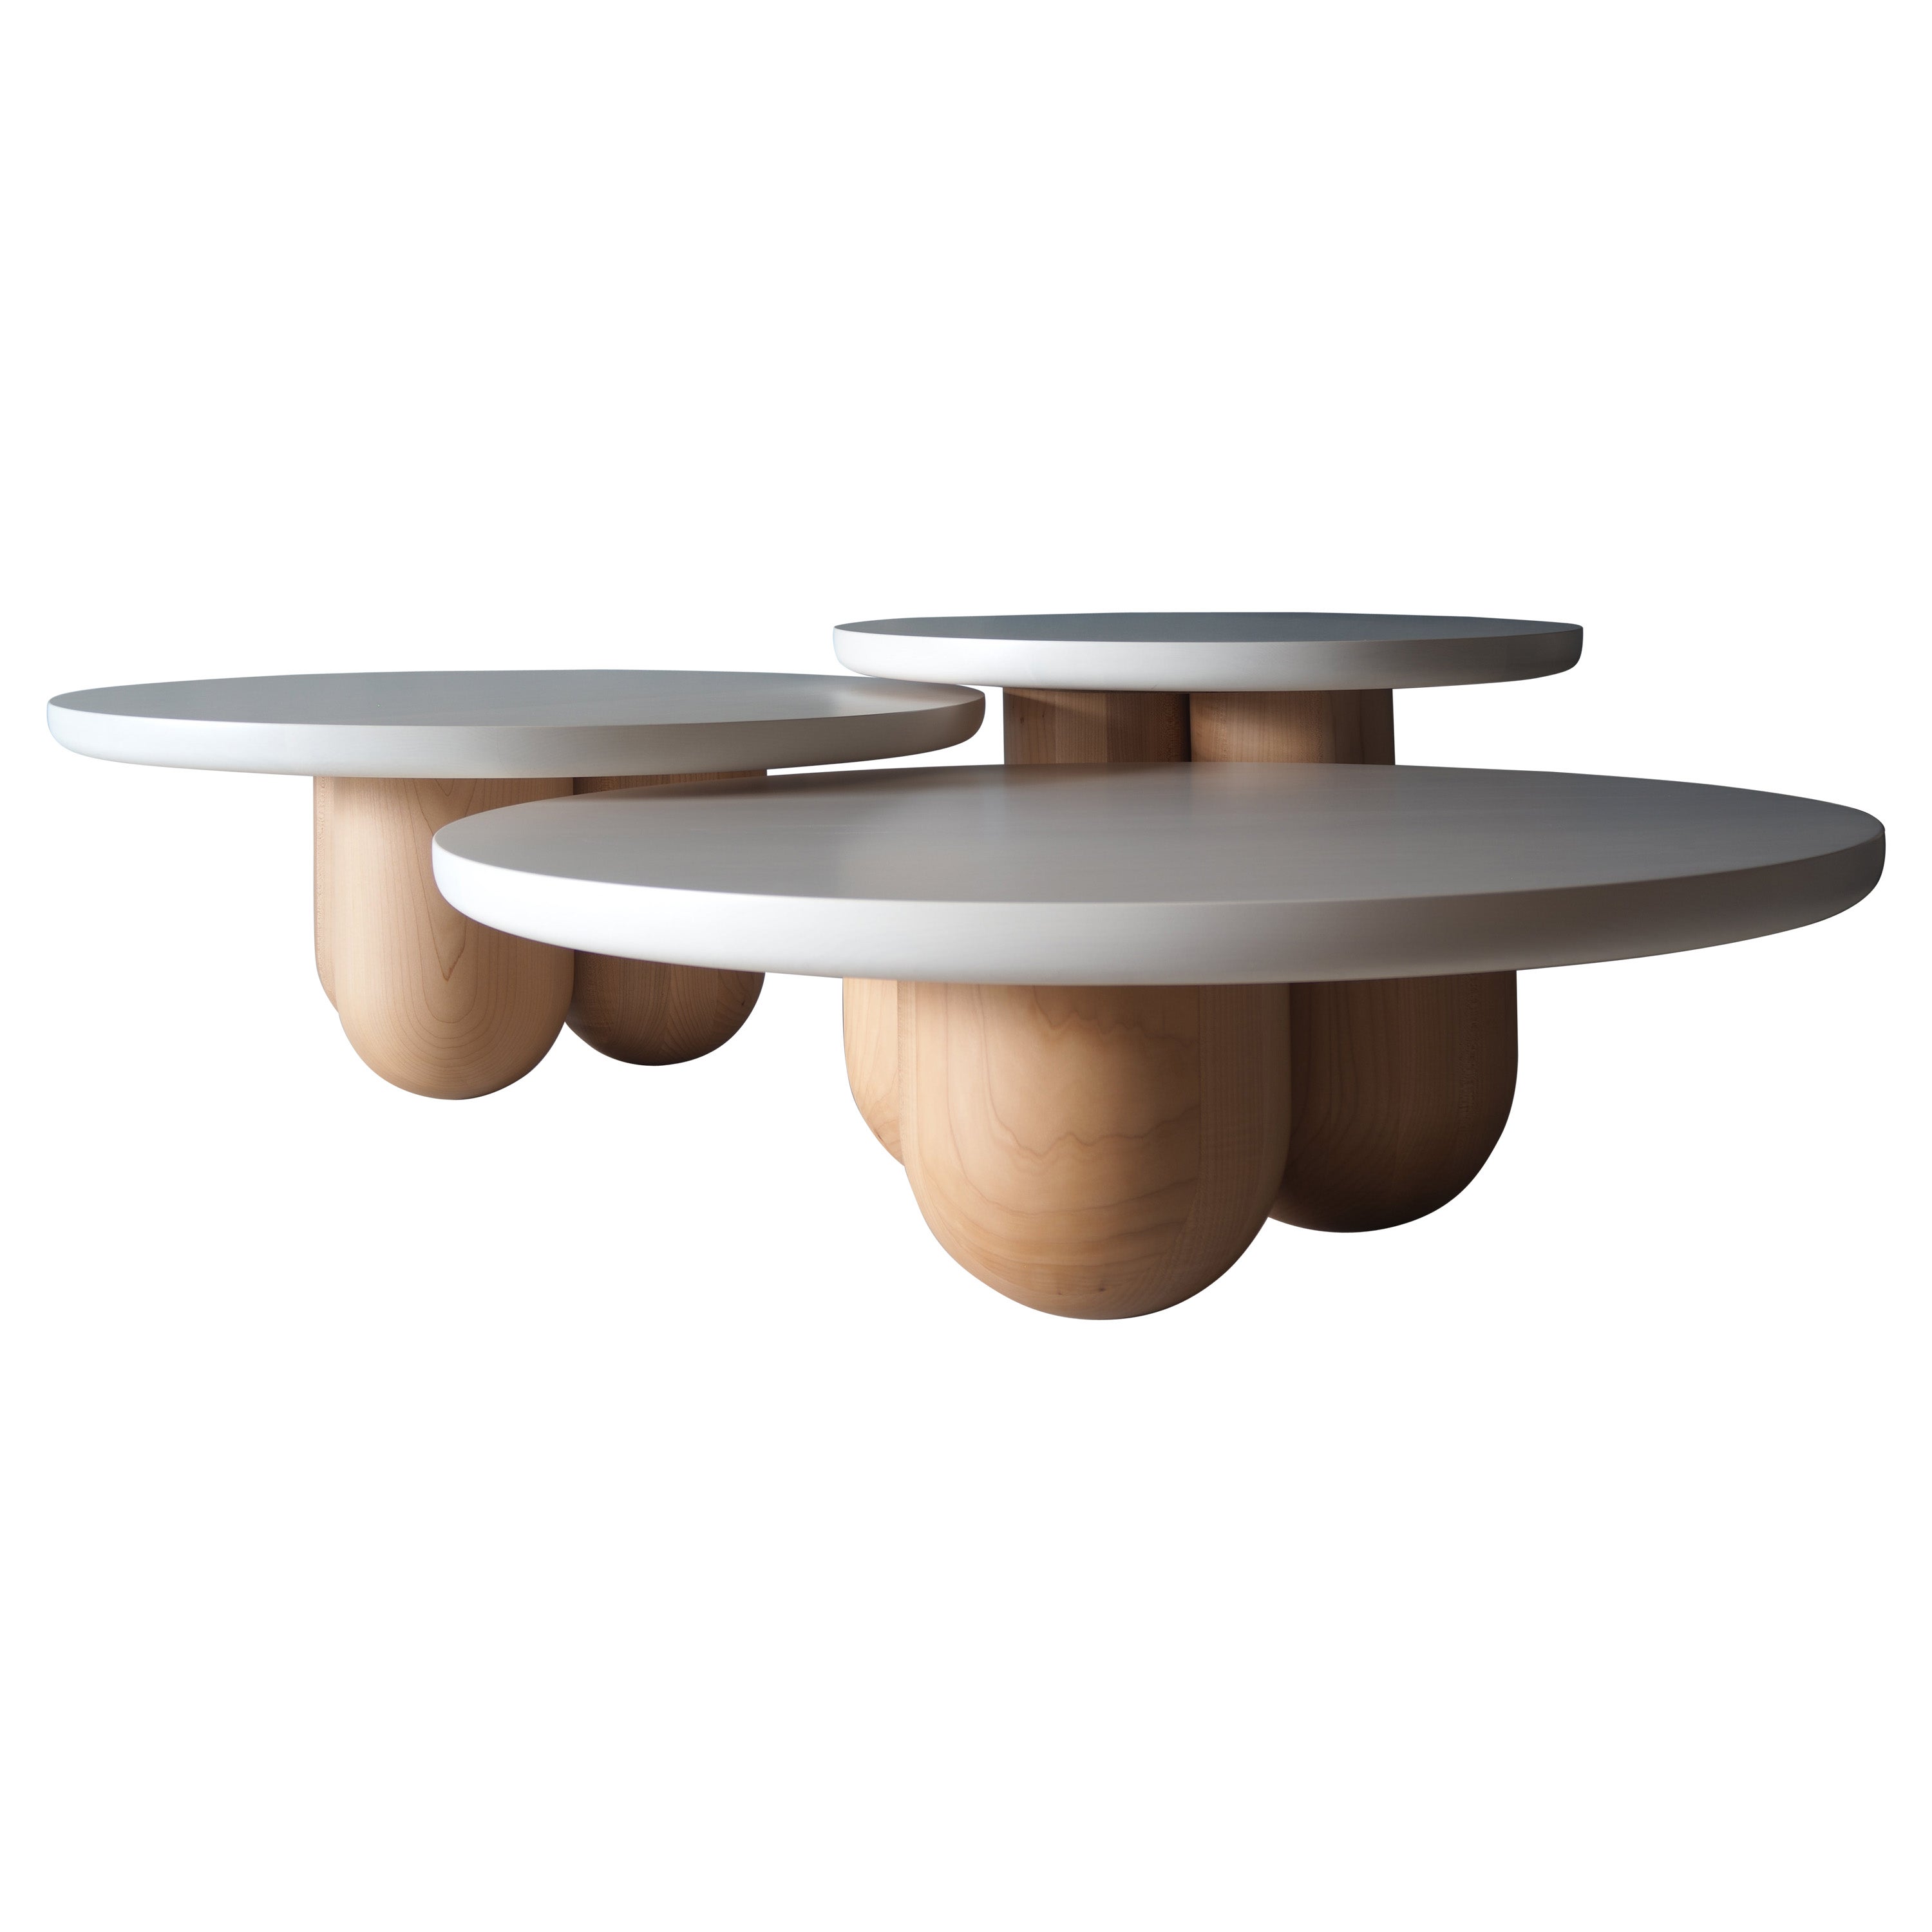 Our Tri-Nesting column tables are inspired by columns left behind by ancient Greek and Roman architecture. Fitting well in many interiors the tables whitened finish allows you to admire the wood grain below. These tables have a solid whitened maple